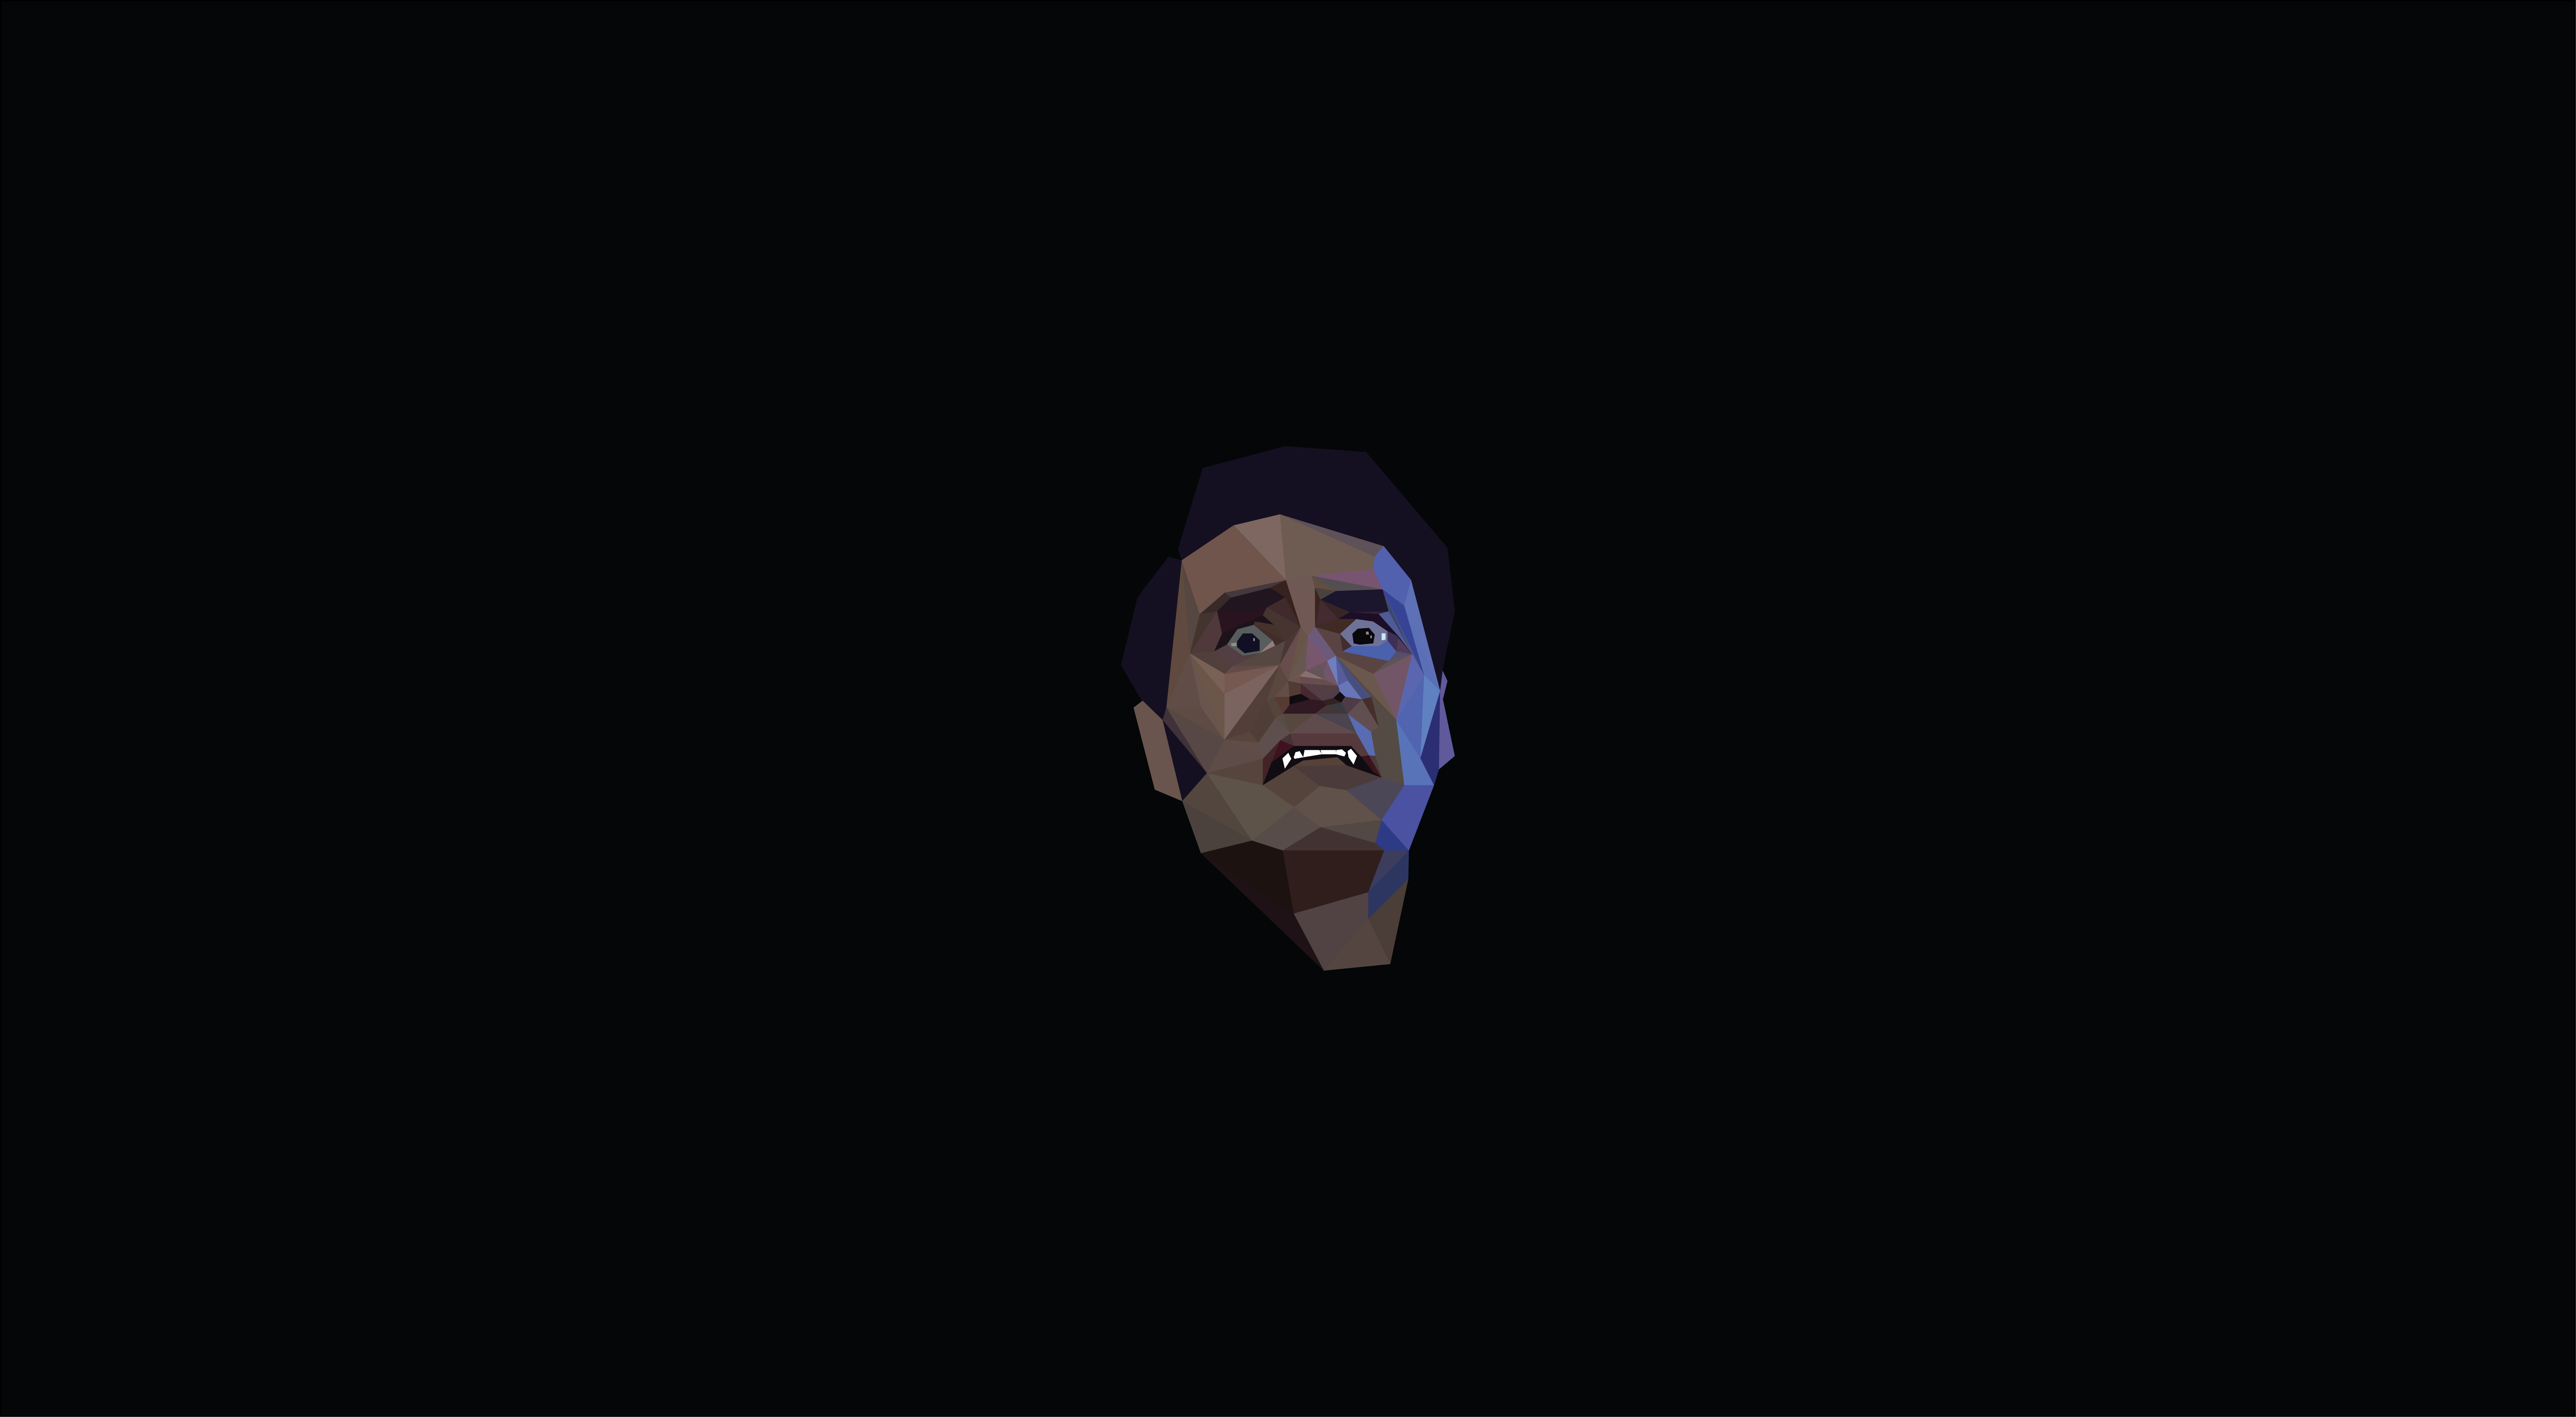 What We Do In The Shadows Low Poly [1920x1080] wallpaper